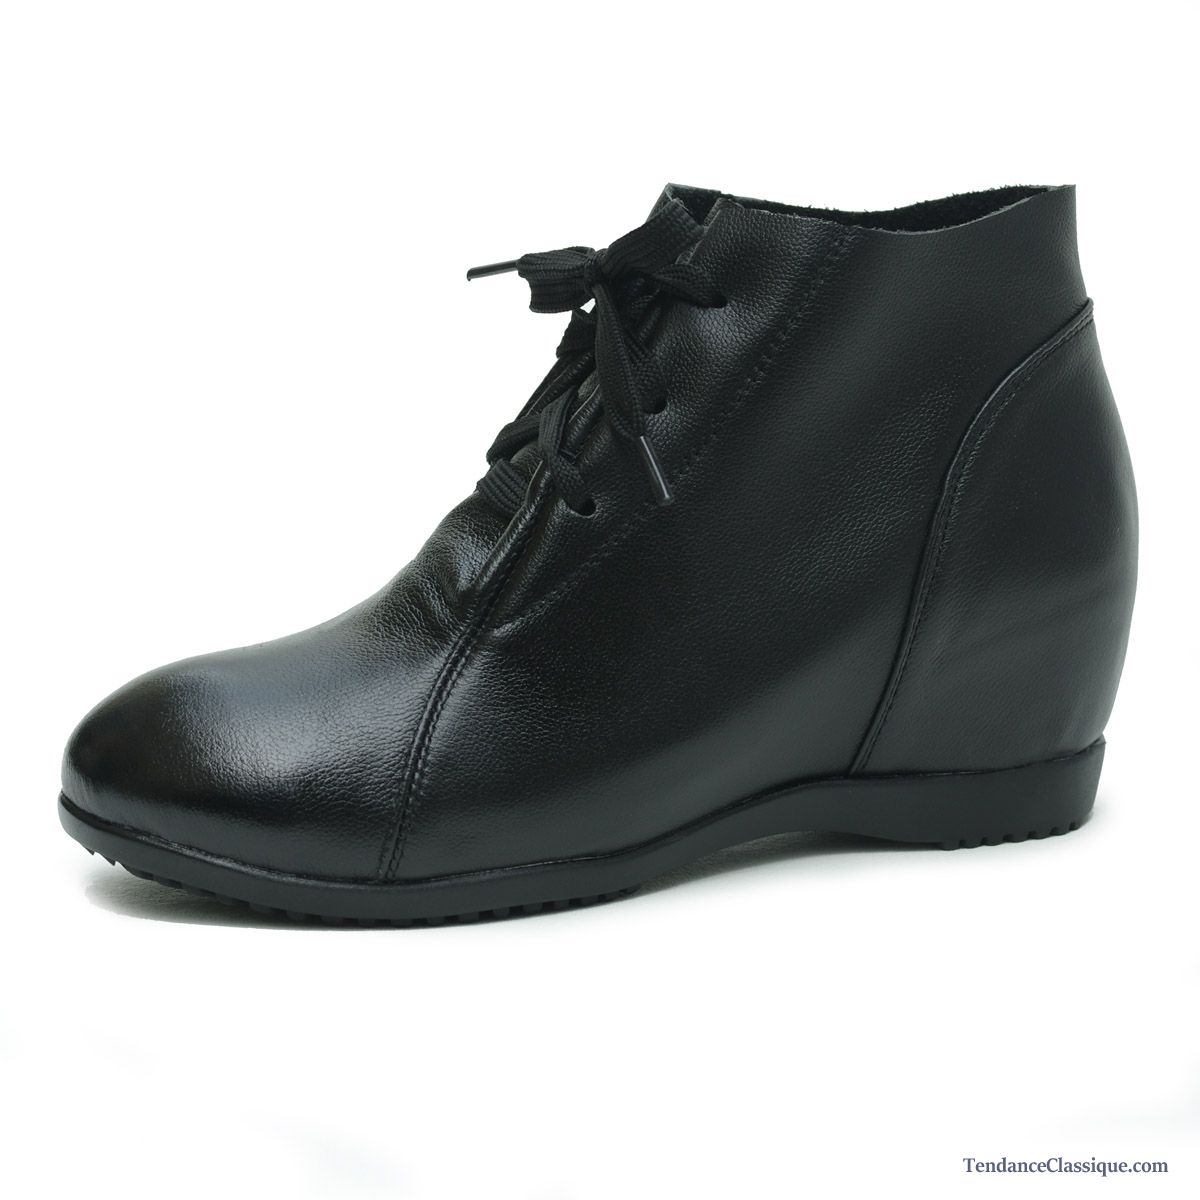 Chaussure Femme Boots Or, Bottes Cuir Pas Cher